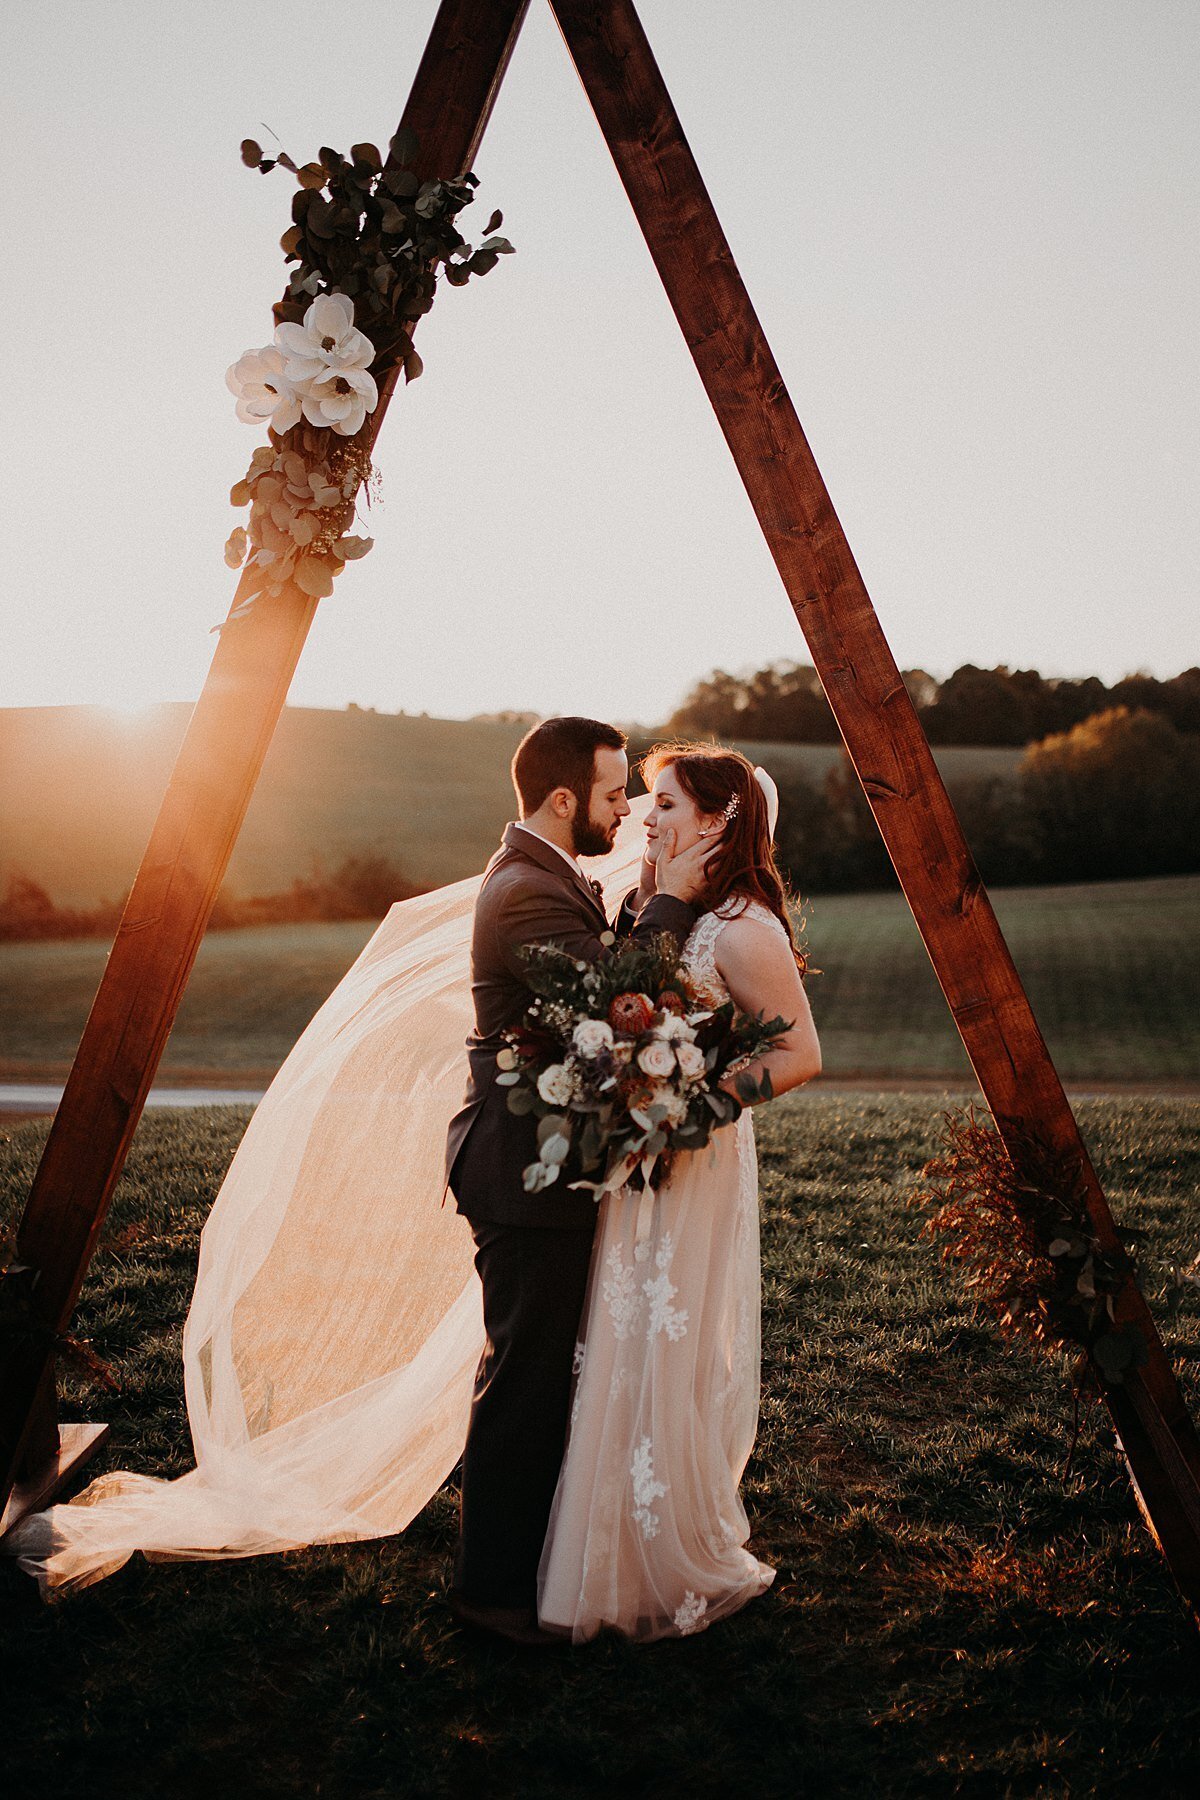 Standing under a triangular dark wood arbor decorated with silver dollar eucalyptus and magnolia blossoms, the bride and groom kiss at sunset. The bride is wearing a sheer blush wedding dress and is holding a large bouquet of red peonies, white roses, white anemonies, burgundy dahlia and eucalyptus.